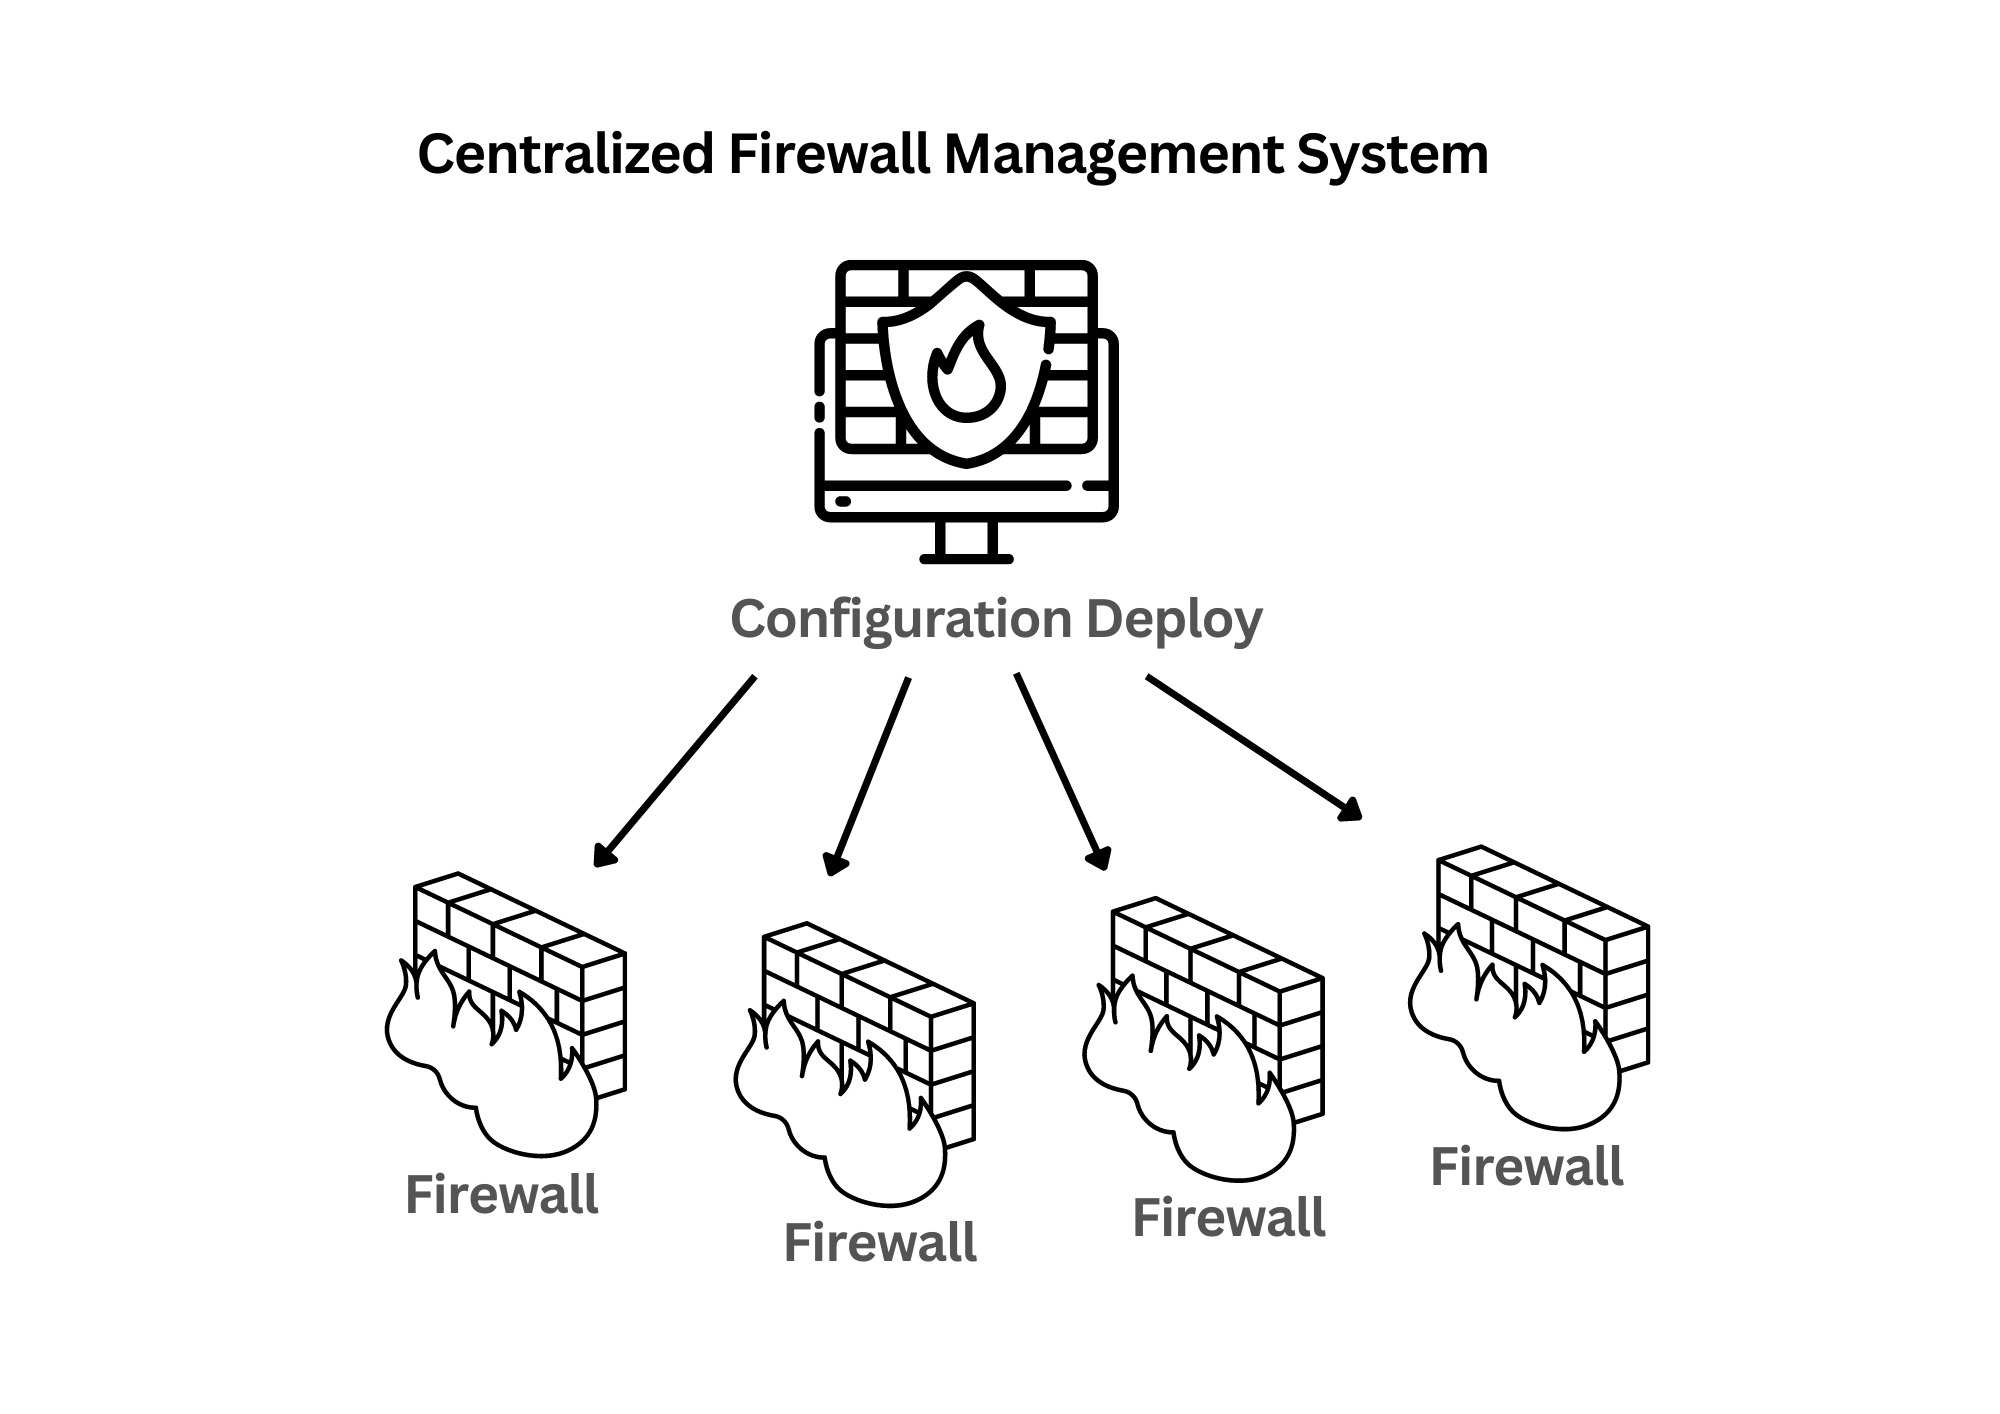 Centralized Firewall Management System